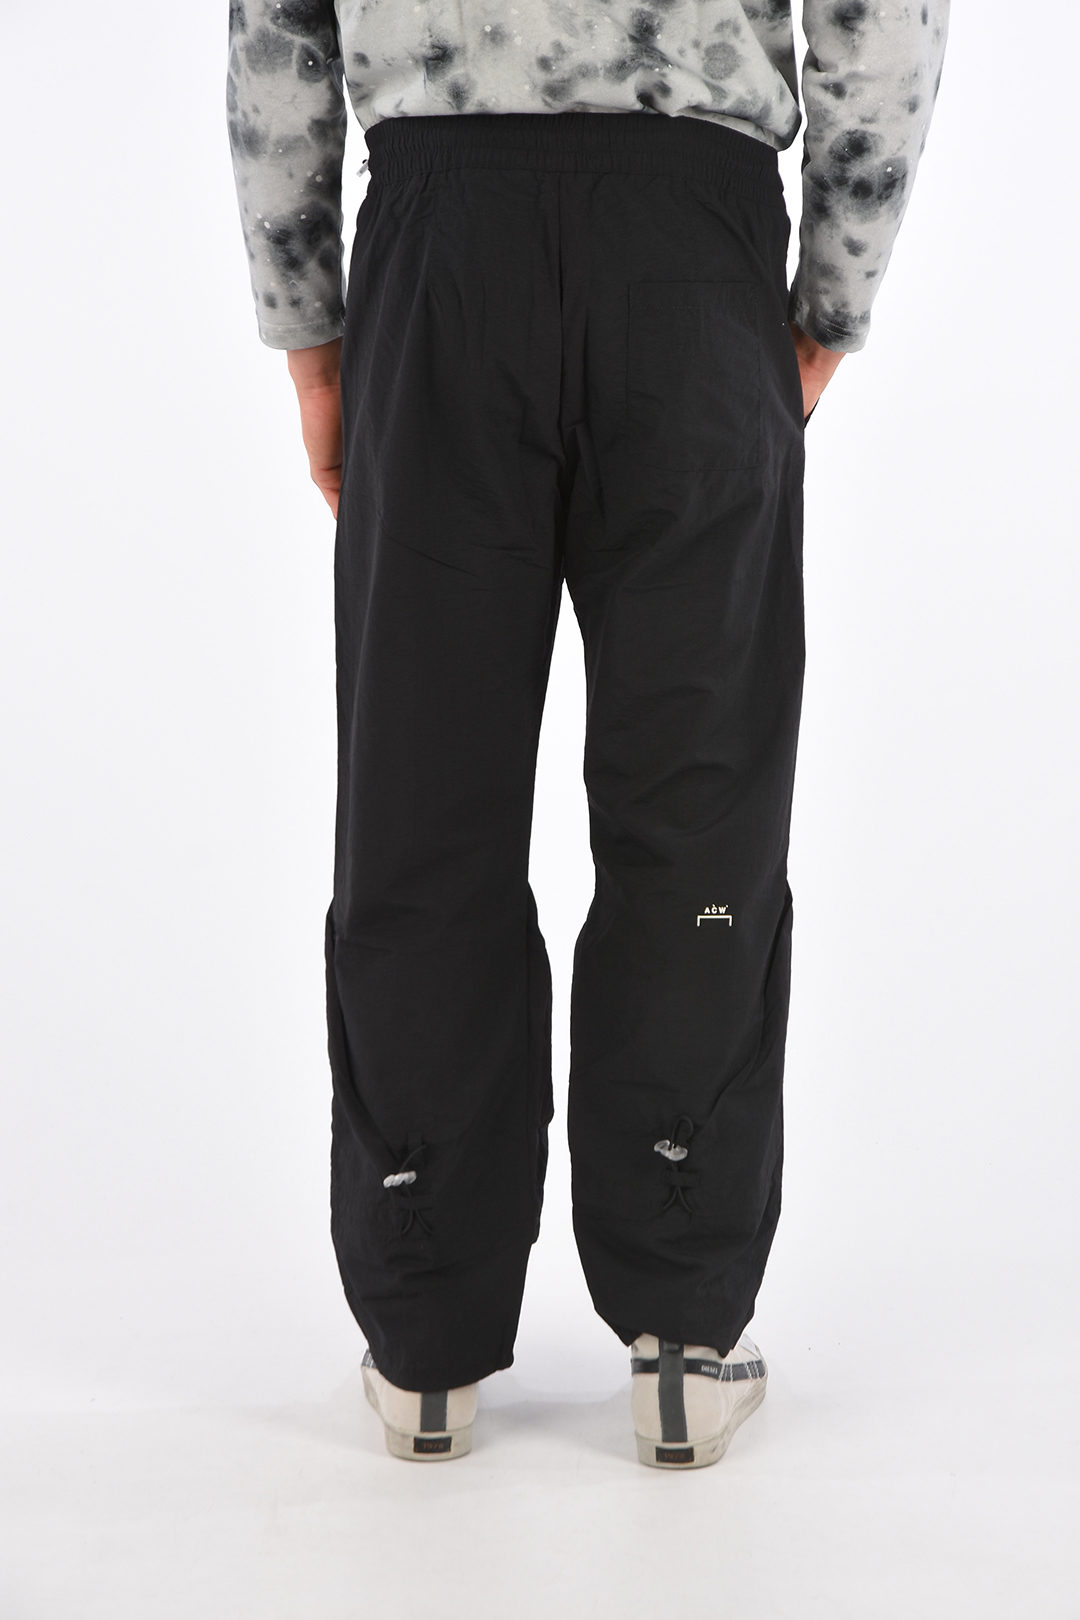 a-cold-wall* pant man system trousers acwmb182 black black Talla 48 Color  negro